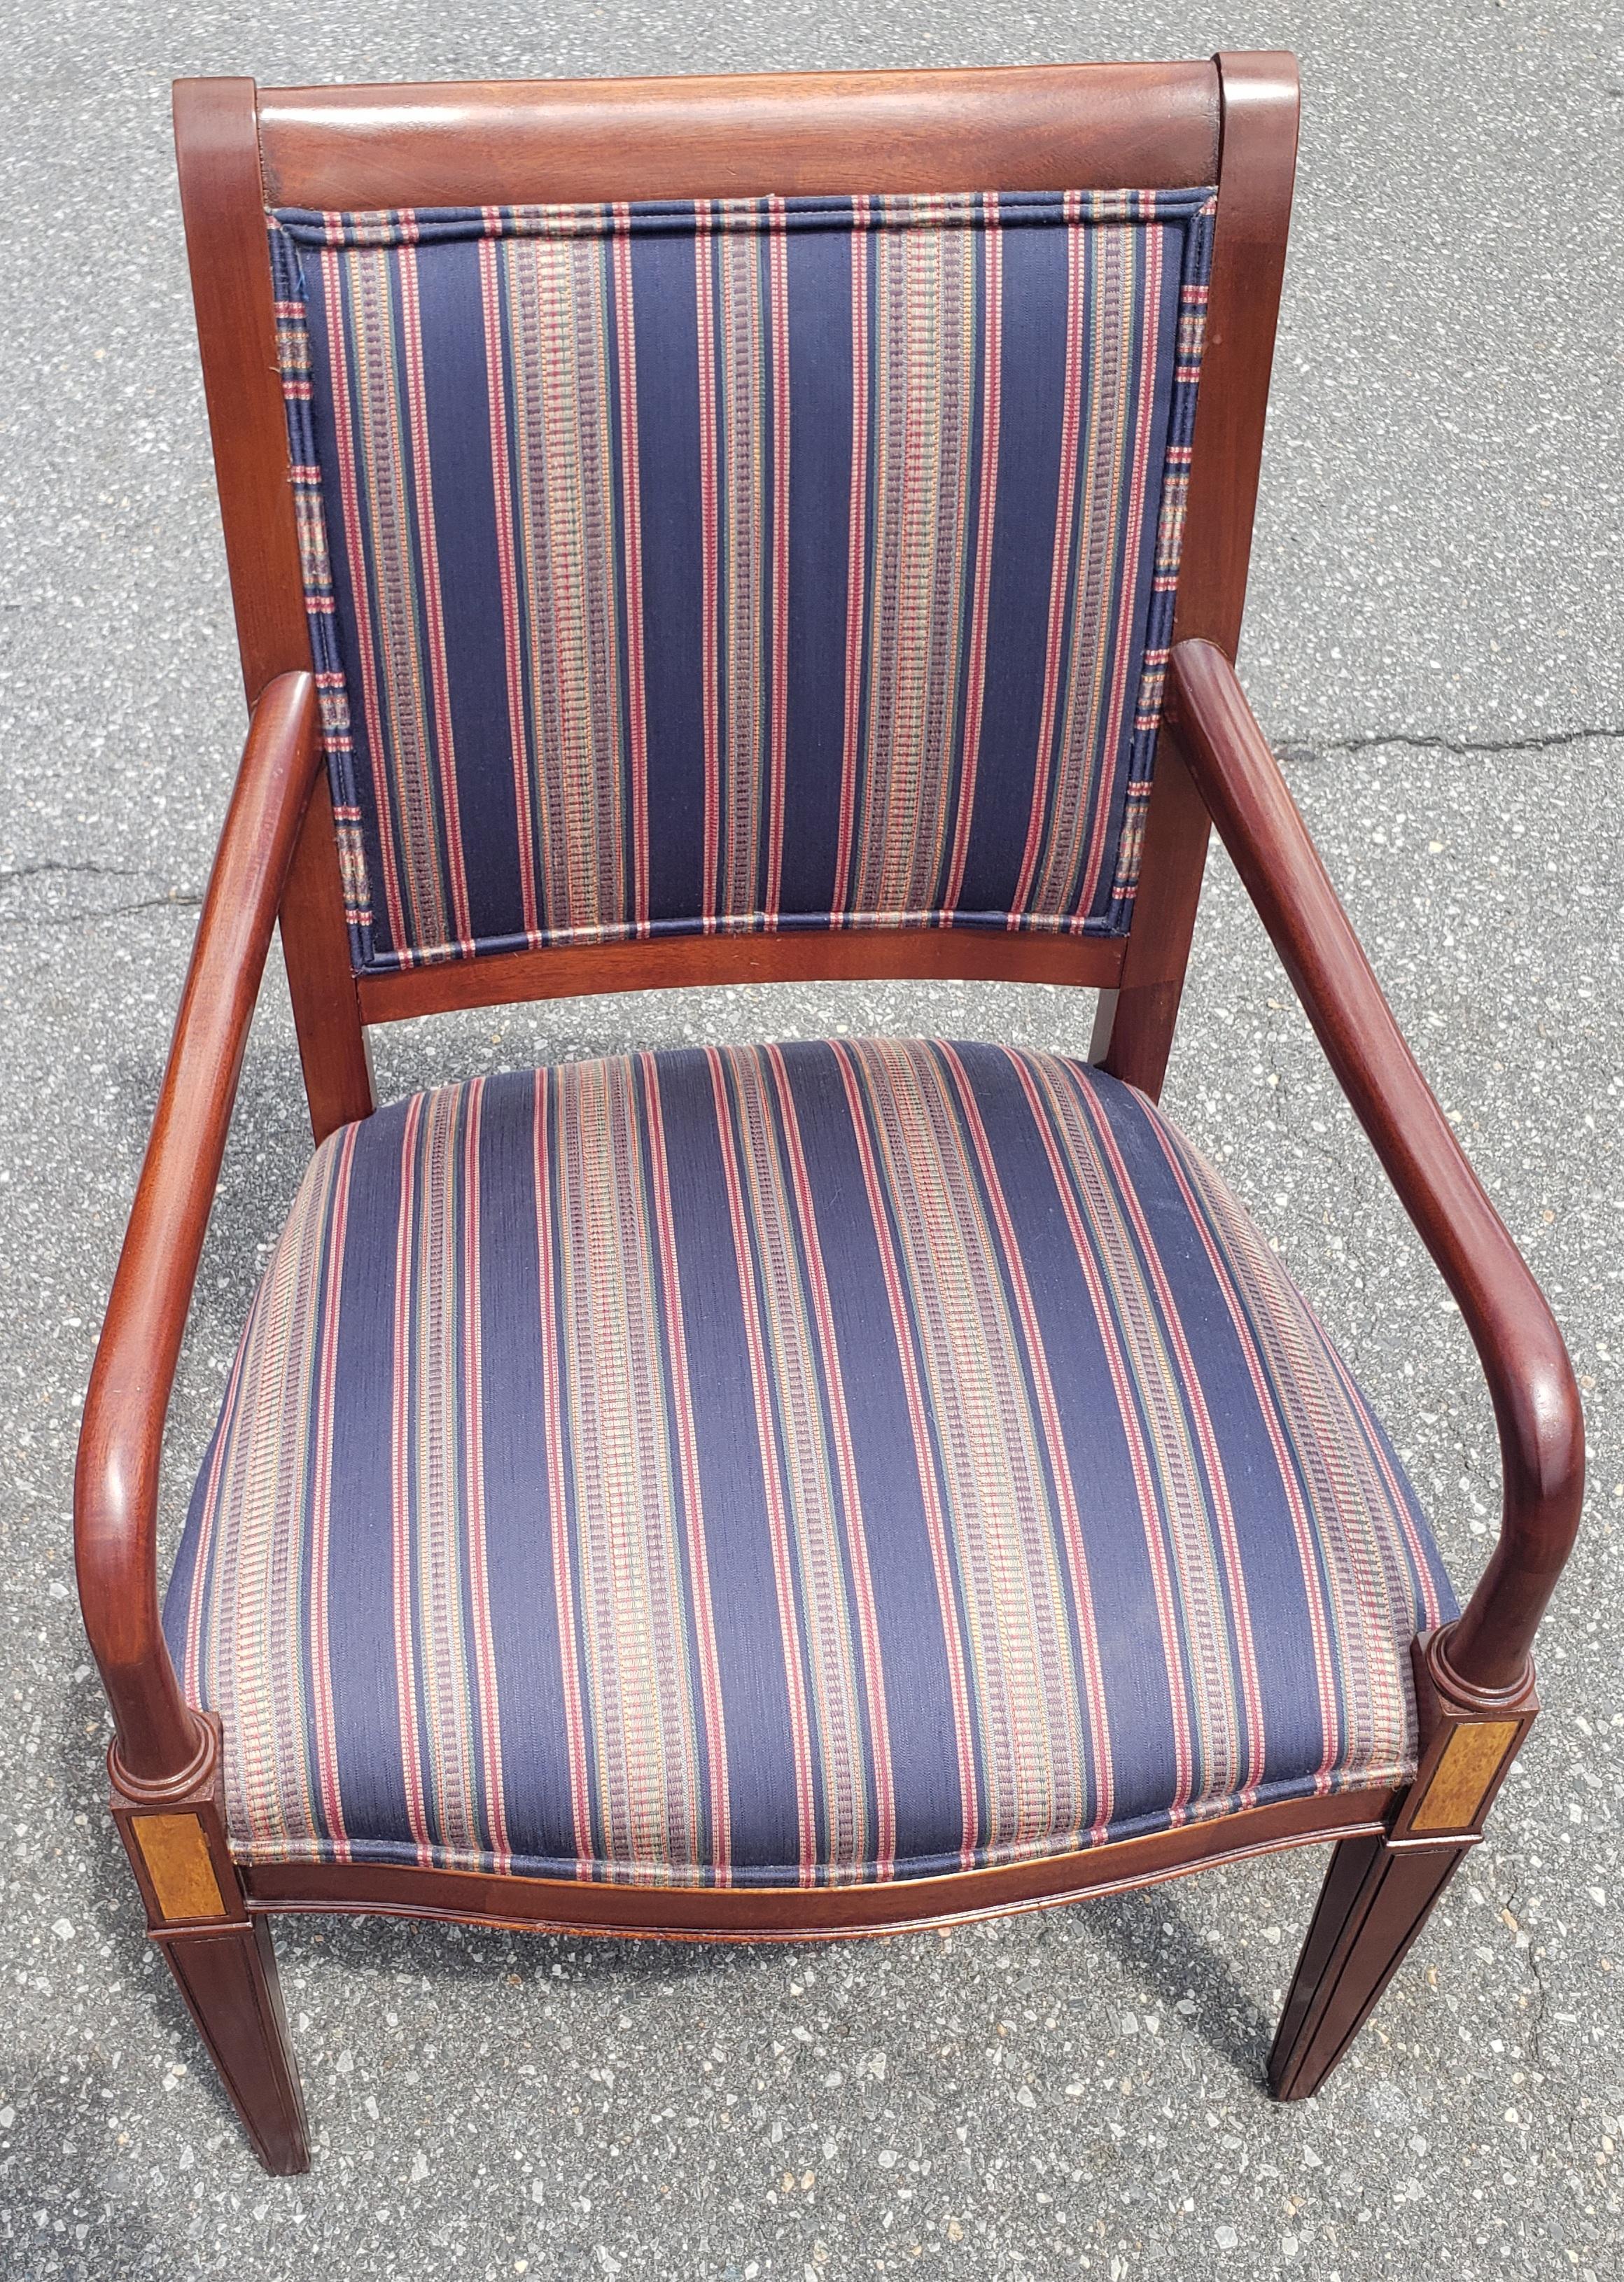 federal style chair